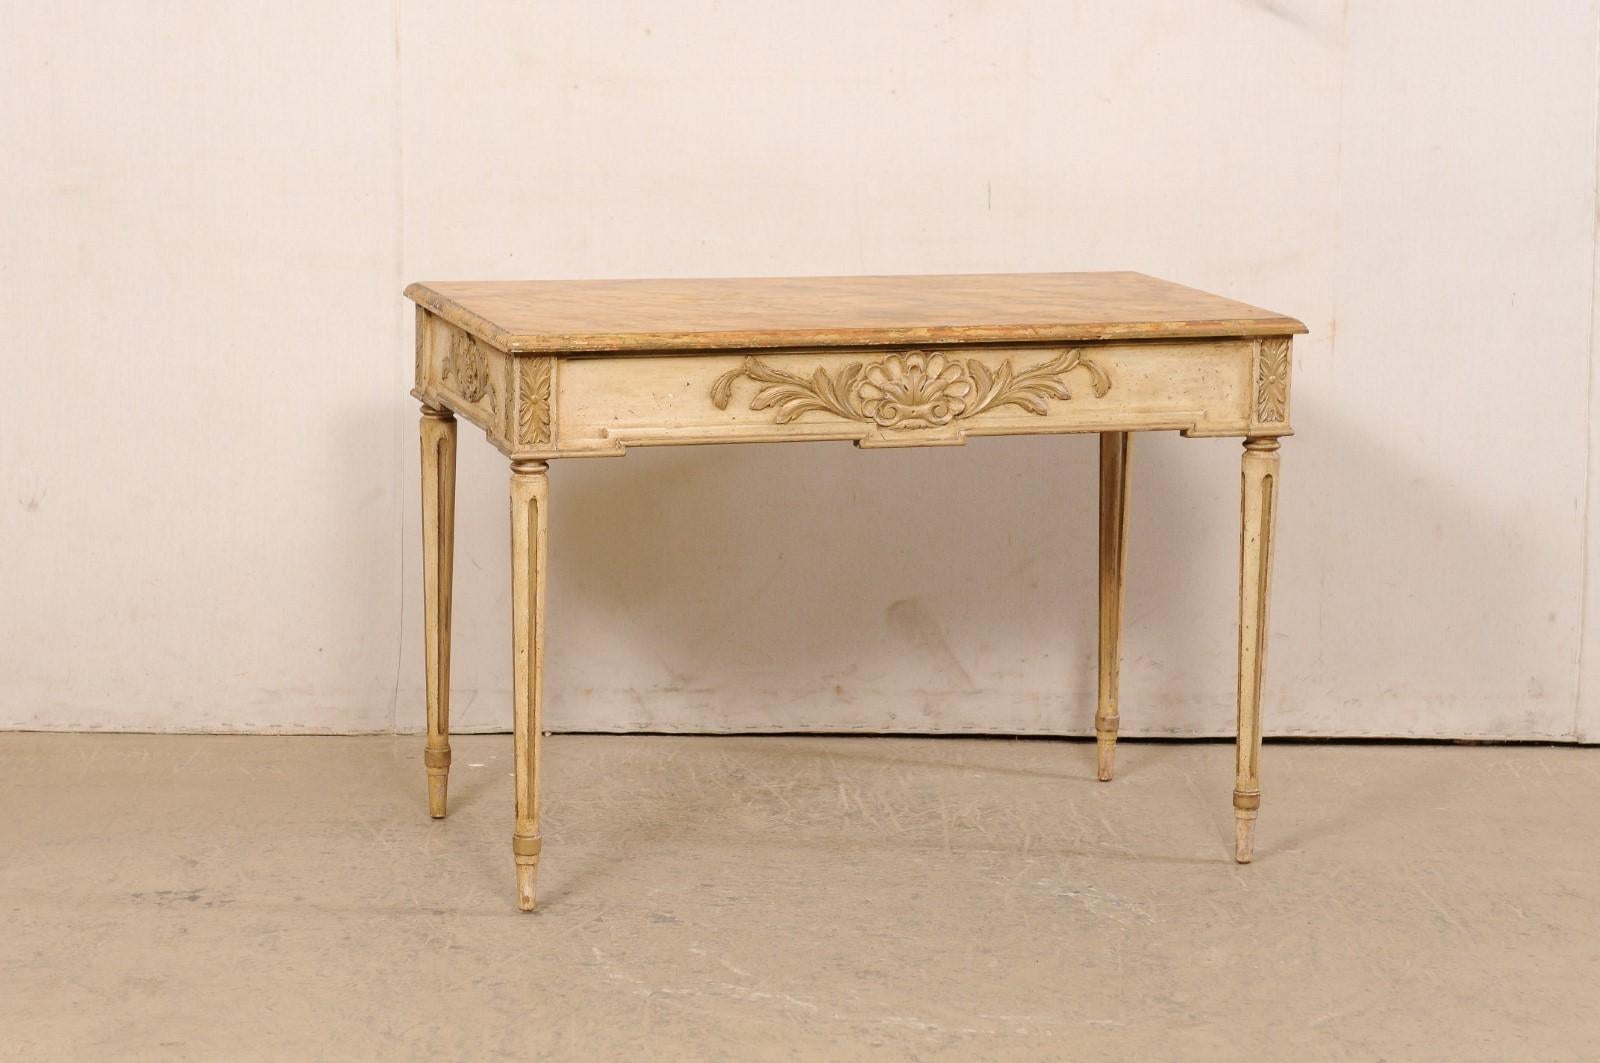 A French carved console table, with its original painted finish, from the early 20th century. This antique table from France has a rectangular-shaped top with hand-painted faux marble design, atop an apron which is embellished with carved shells